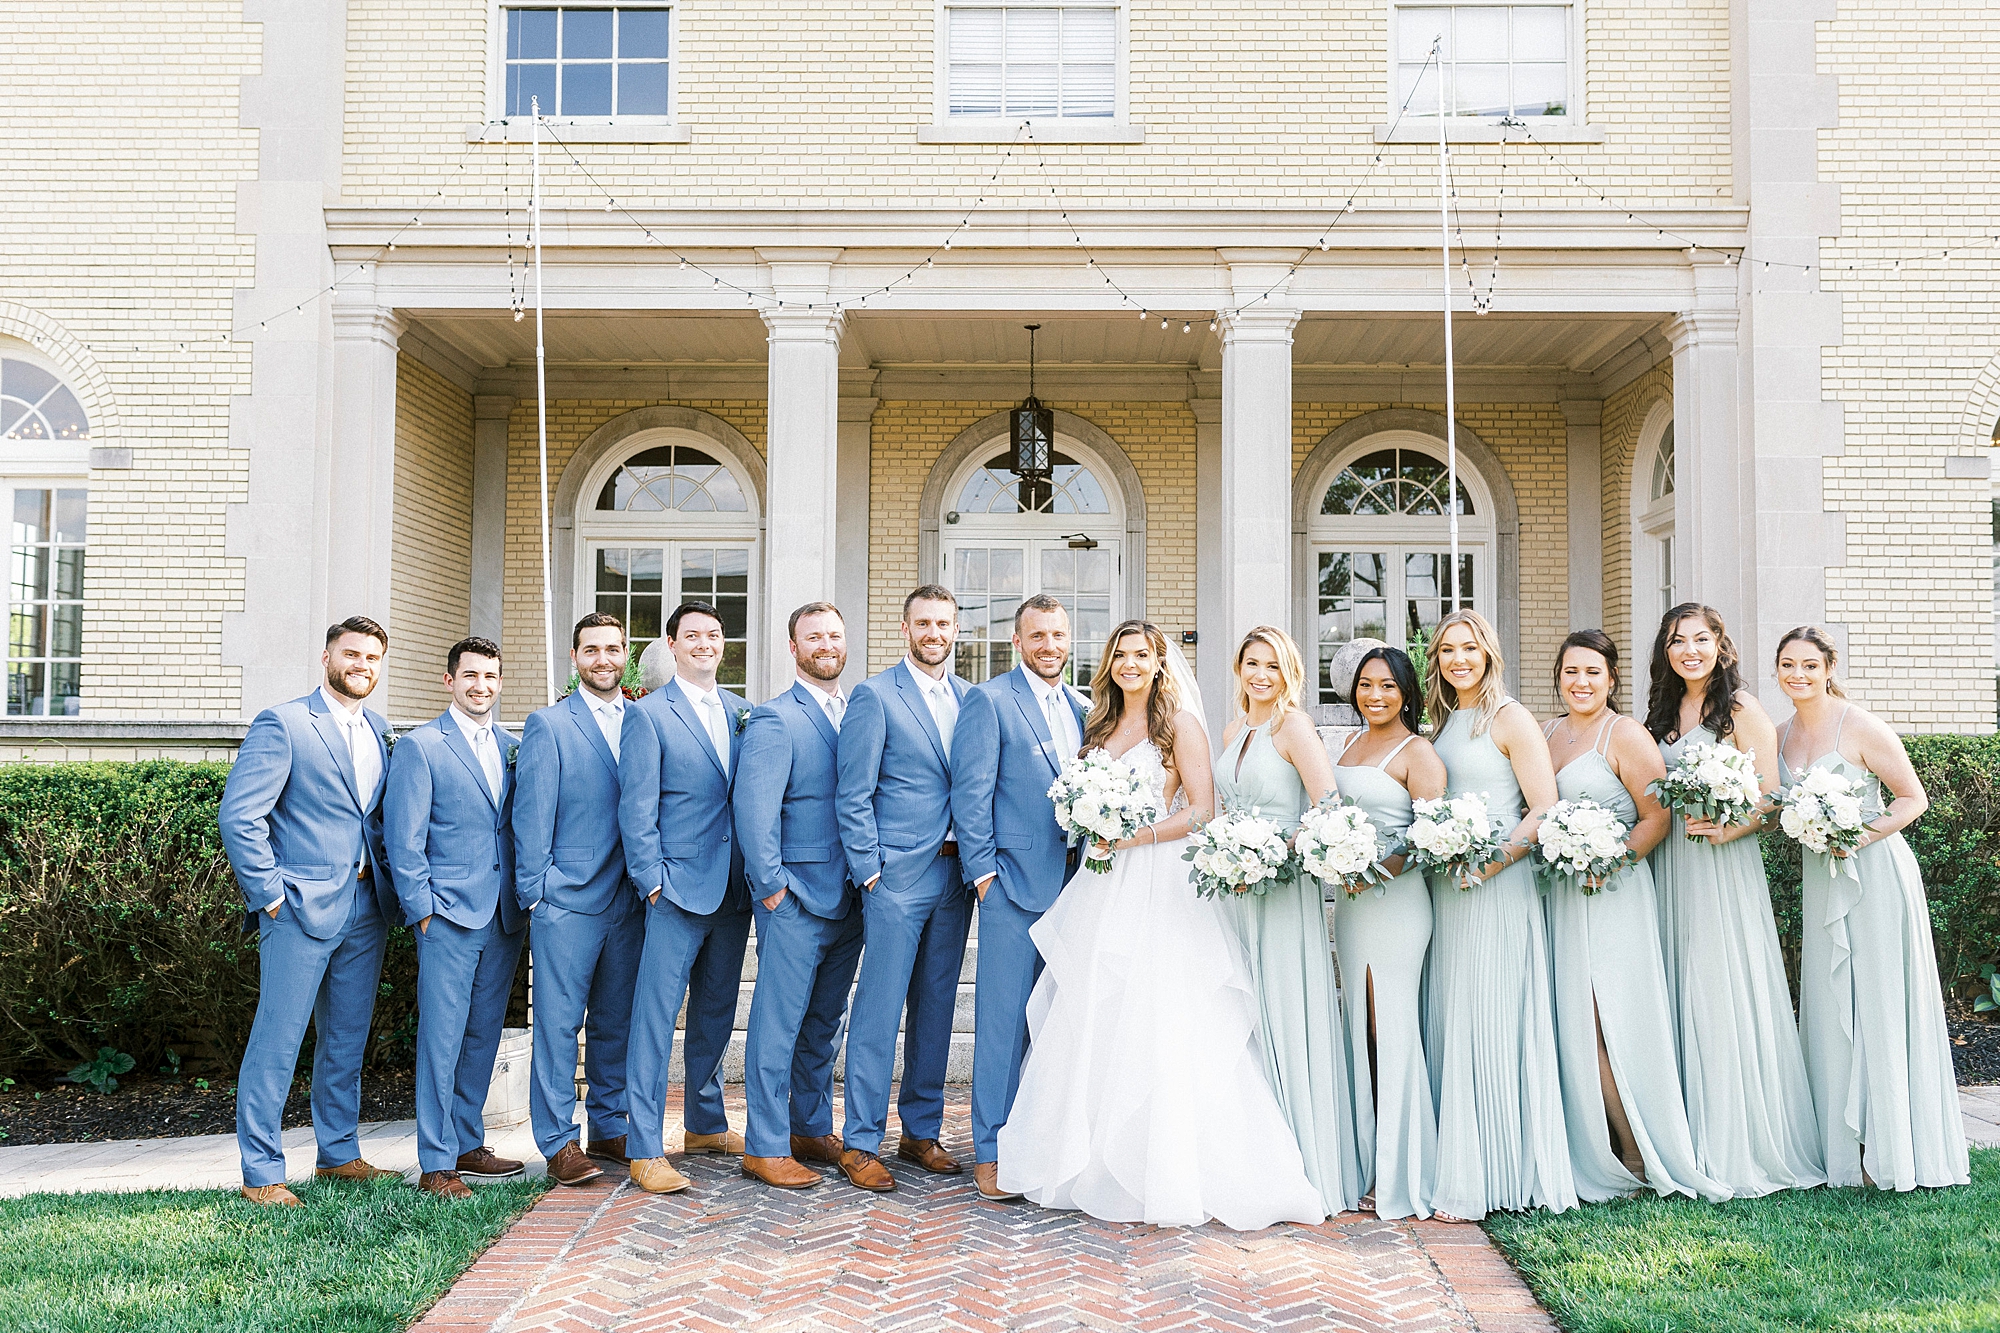 bride and groom stand with wedding party in navy and light green gowns for spring wedding day at Separk Mansion